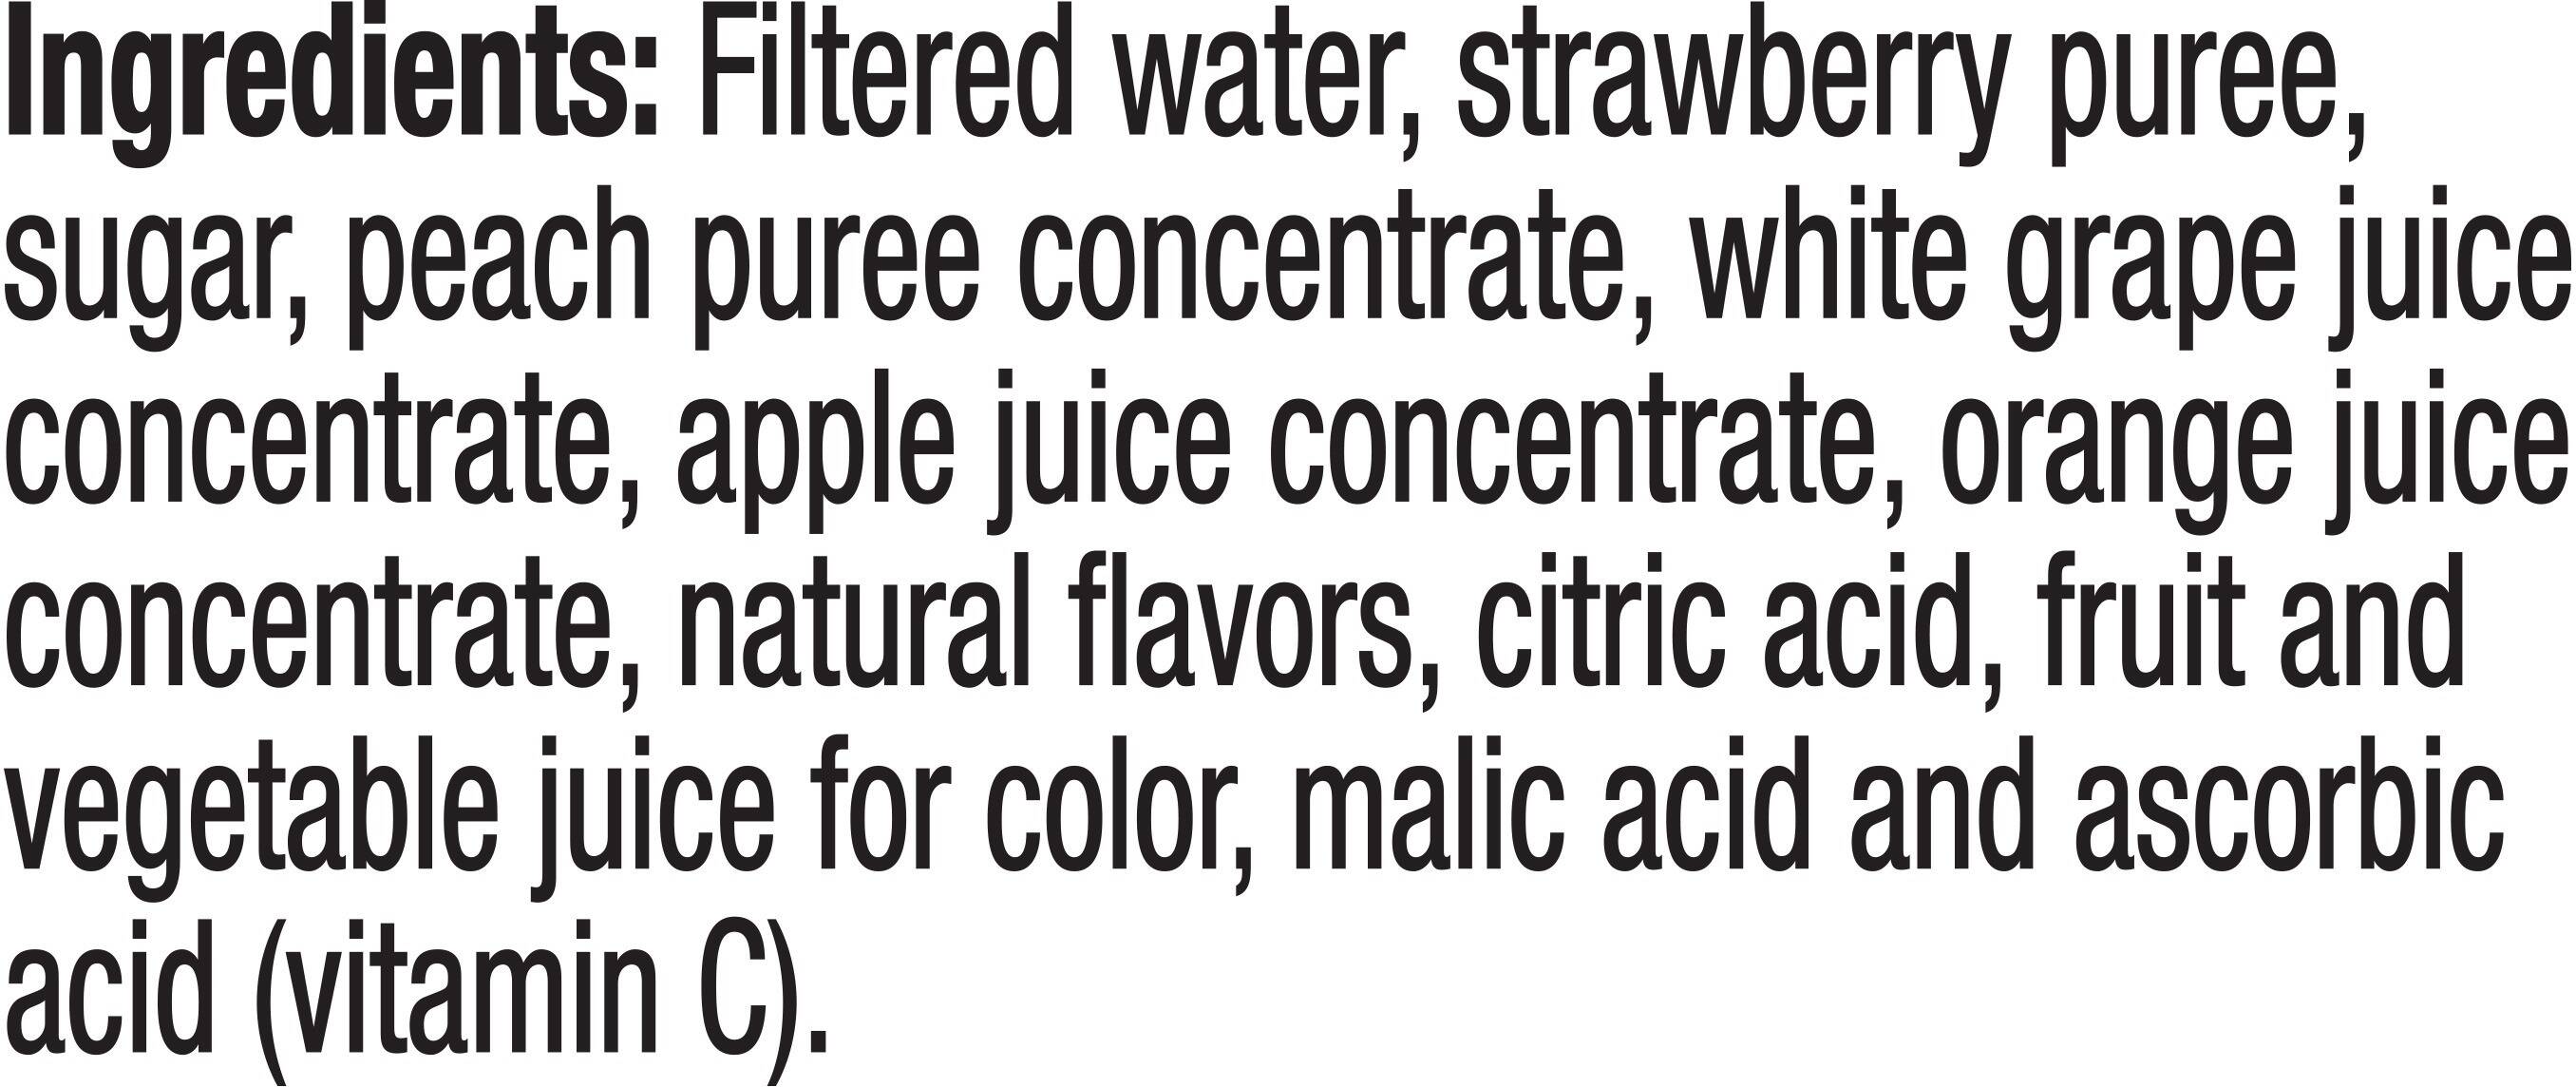 Image describing nutrition information for product Tropicana Strawberry Peach